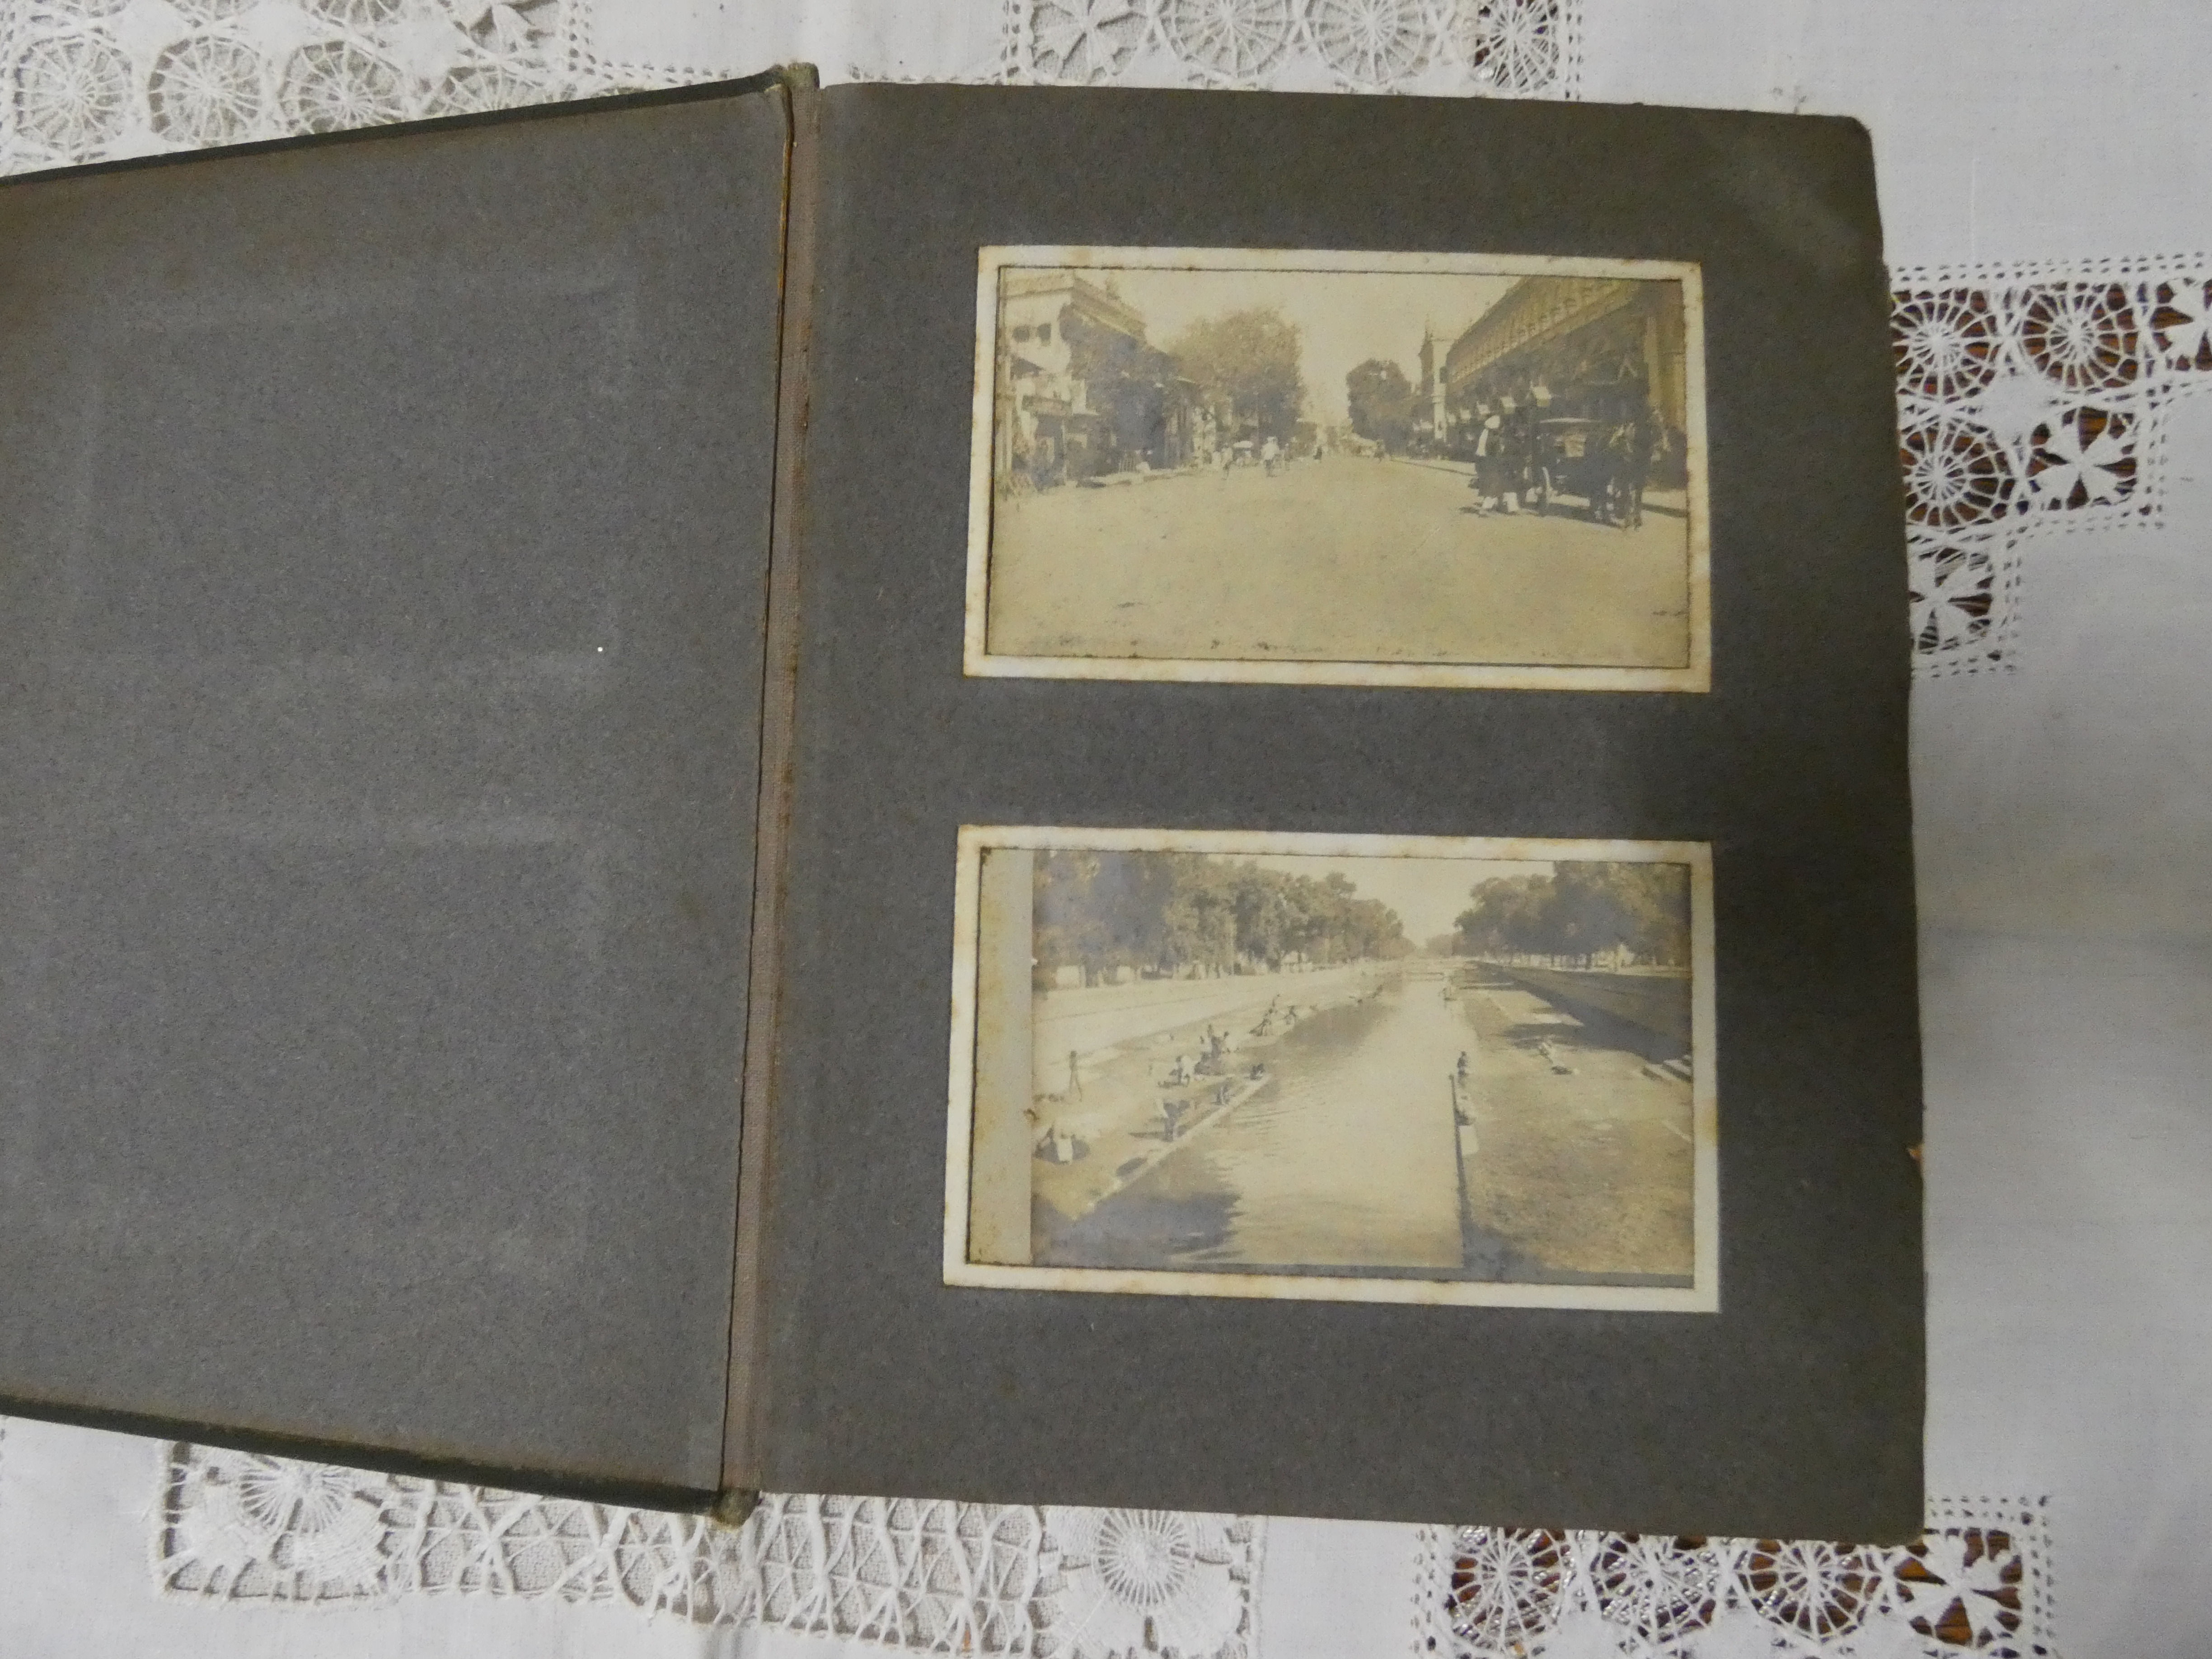 Photograph Album.  1920's neatly presented album of approx. 96 snapshot photographs, 2.5" x 4", of